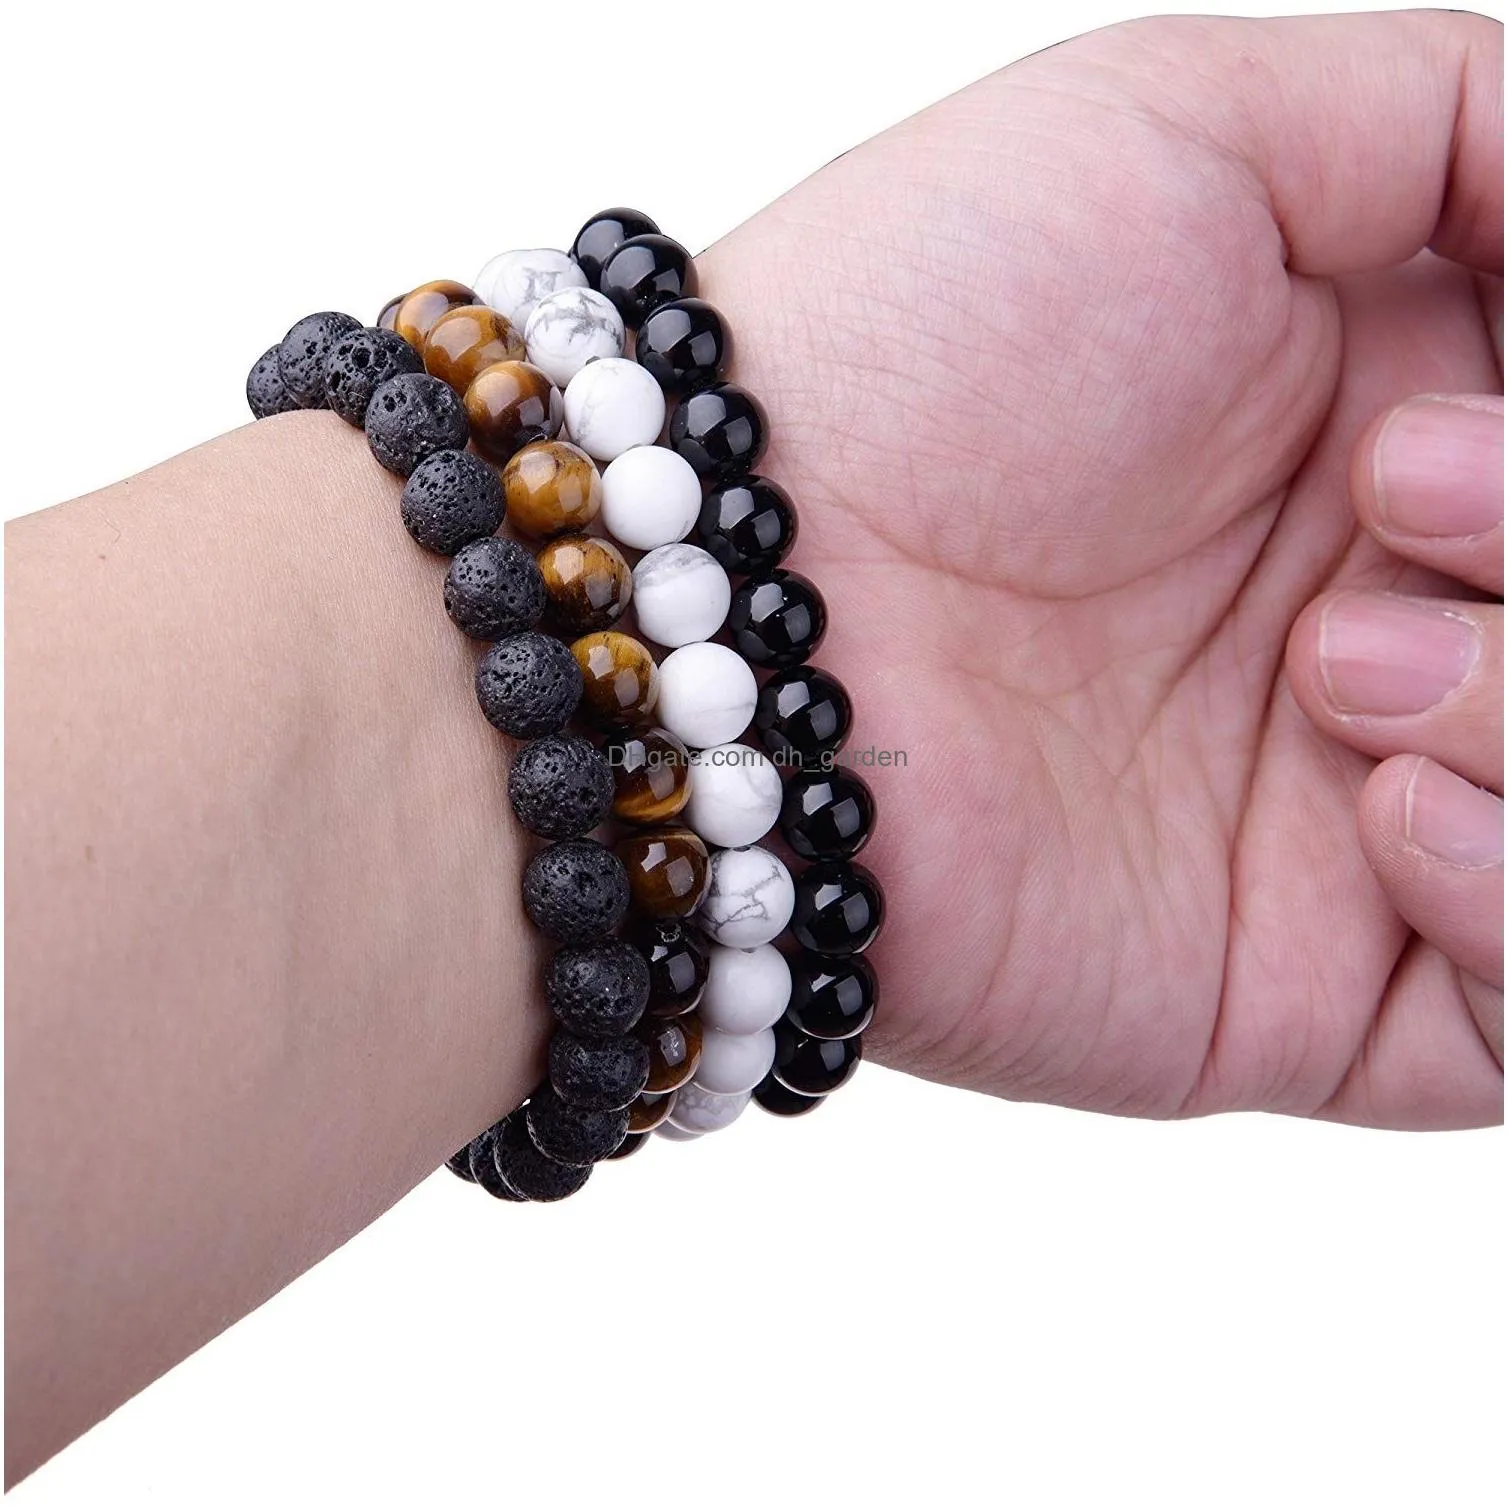 Beaded 8Mm Black Natural Lava Stone Bead Bracelet For Men Women Adjustable Oil Per Diffuser Healing Stretch Yoga Jewelry Dr Dhgarden Dhafy